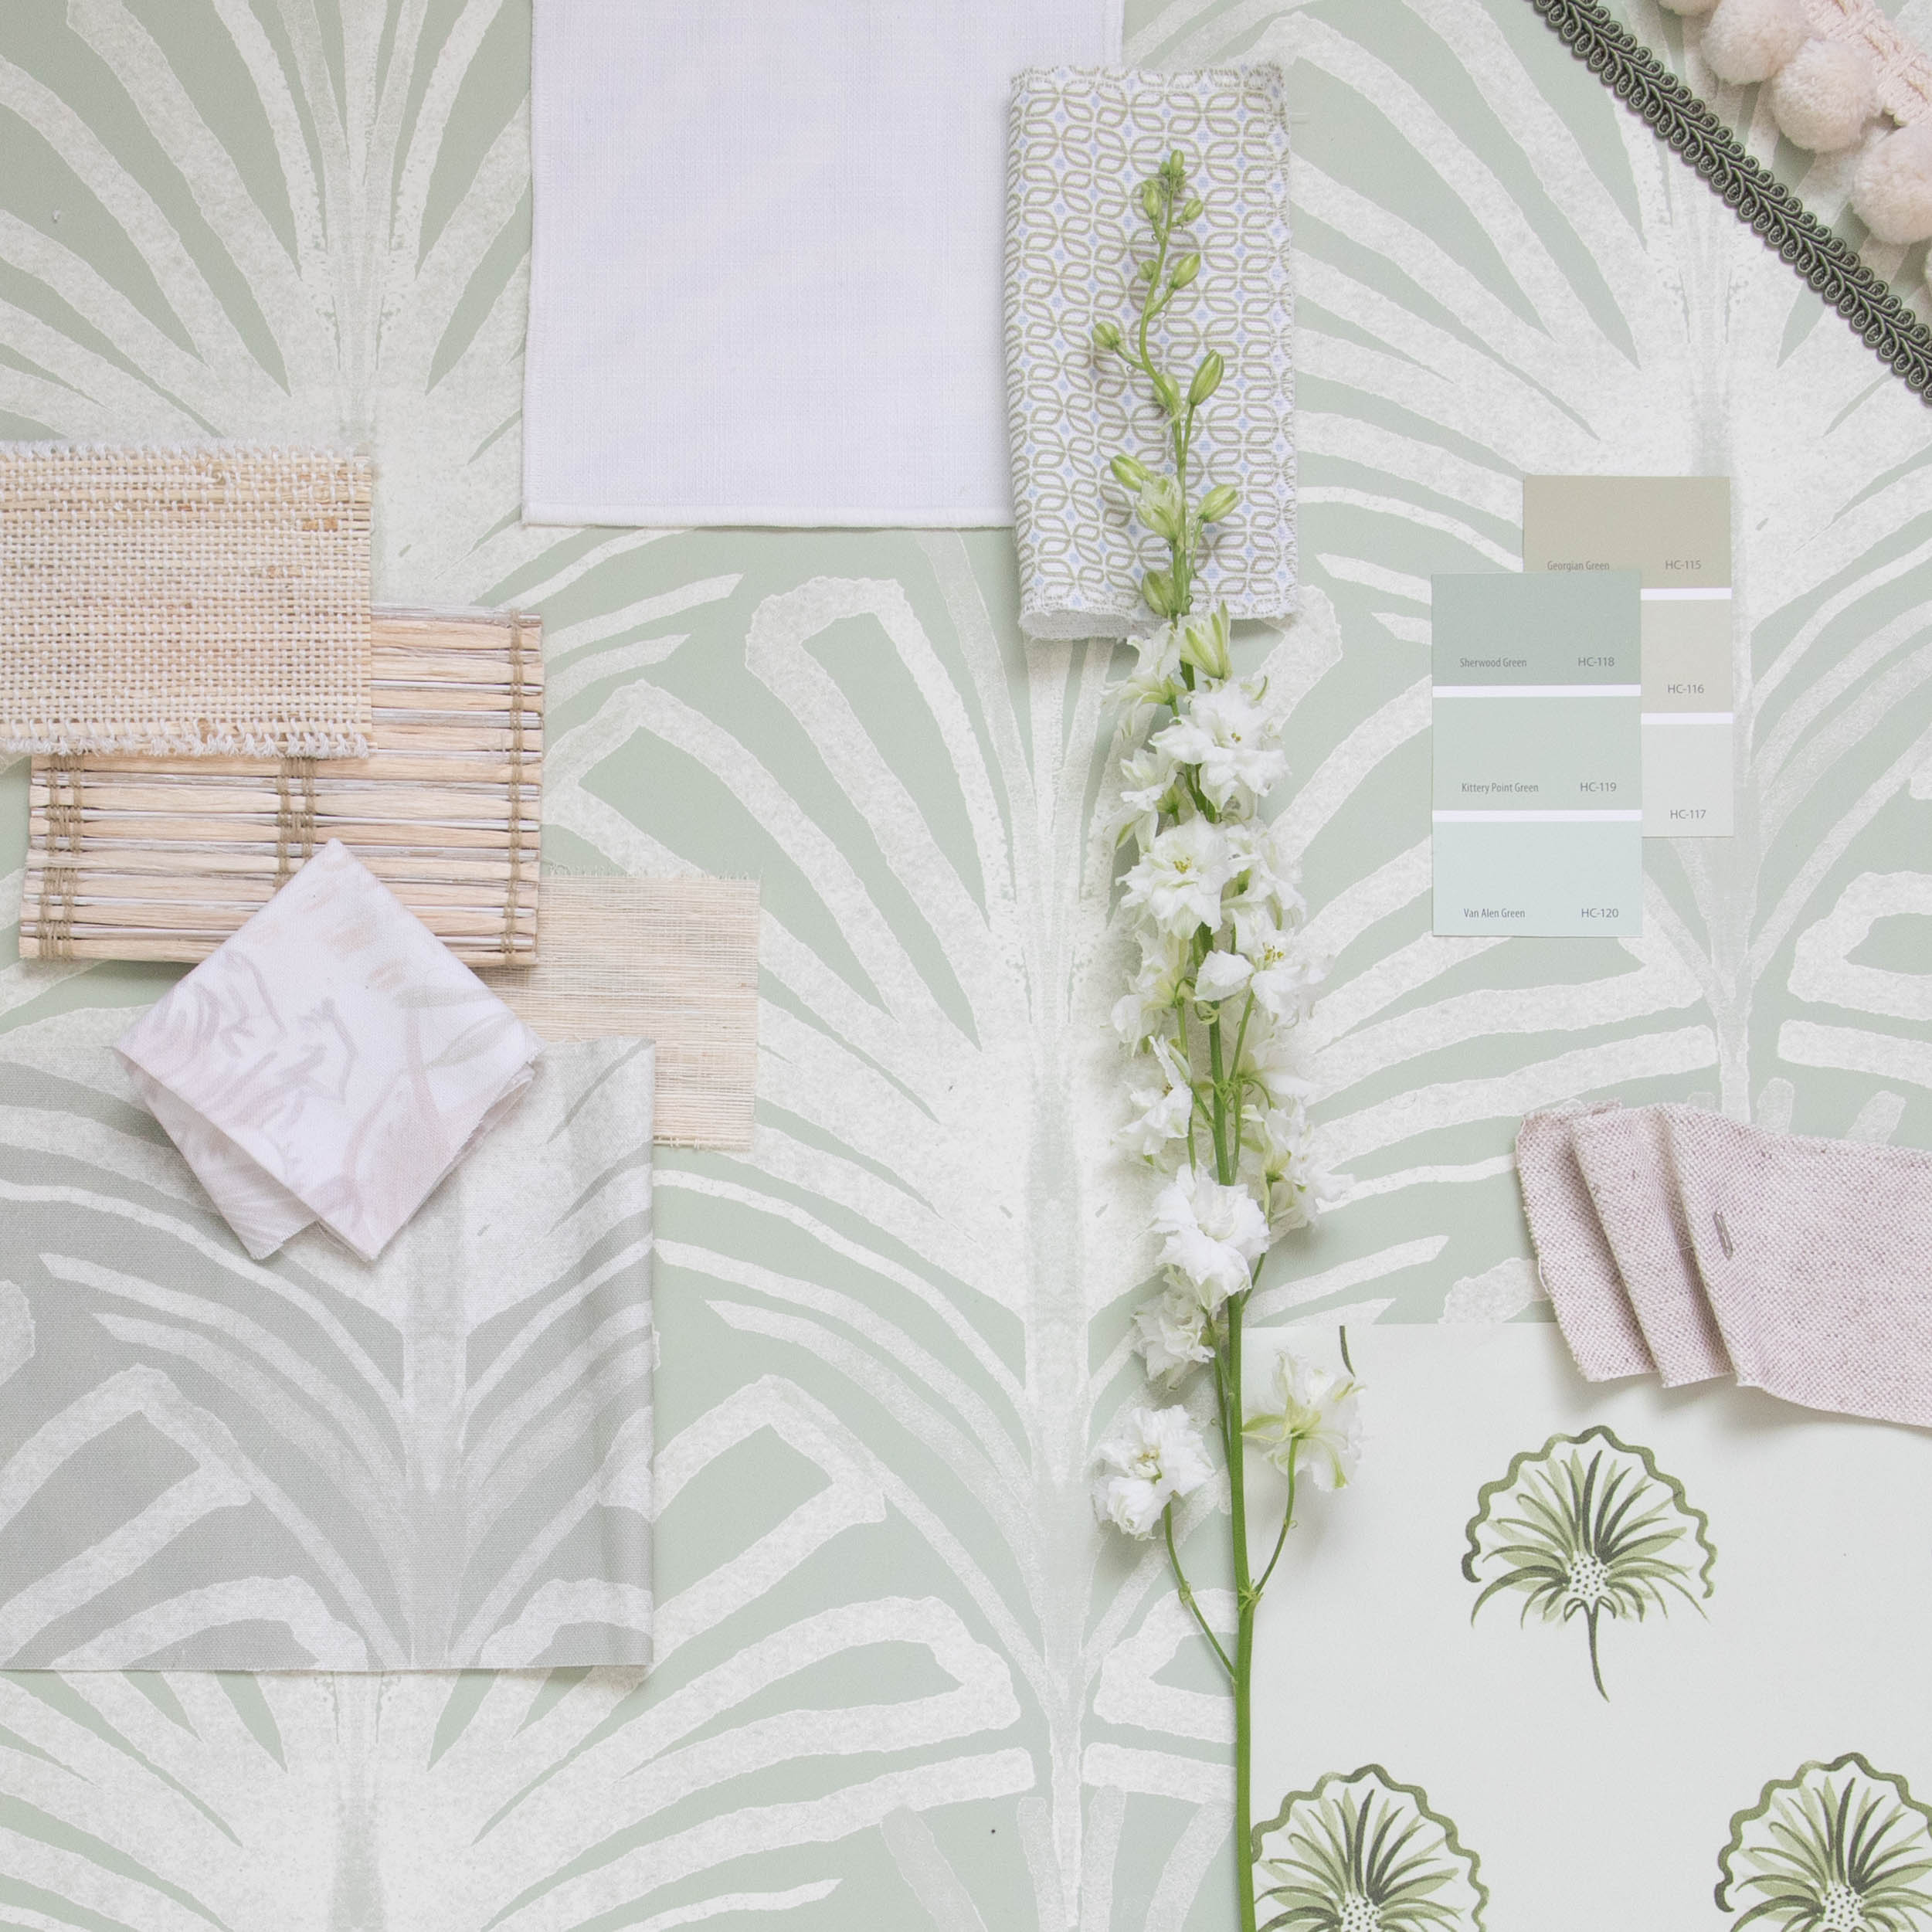 Interior design moodboard and fabric inspirations with Sage Green Printed Swatch, Green Floral Printed Swatch, light brown swatch, and white cotton swatch